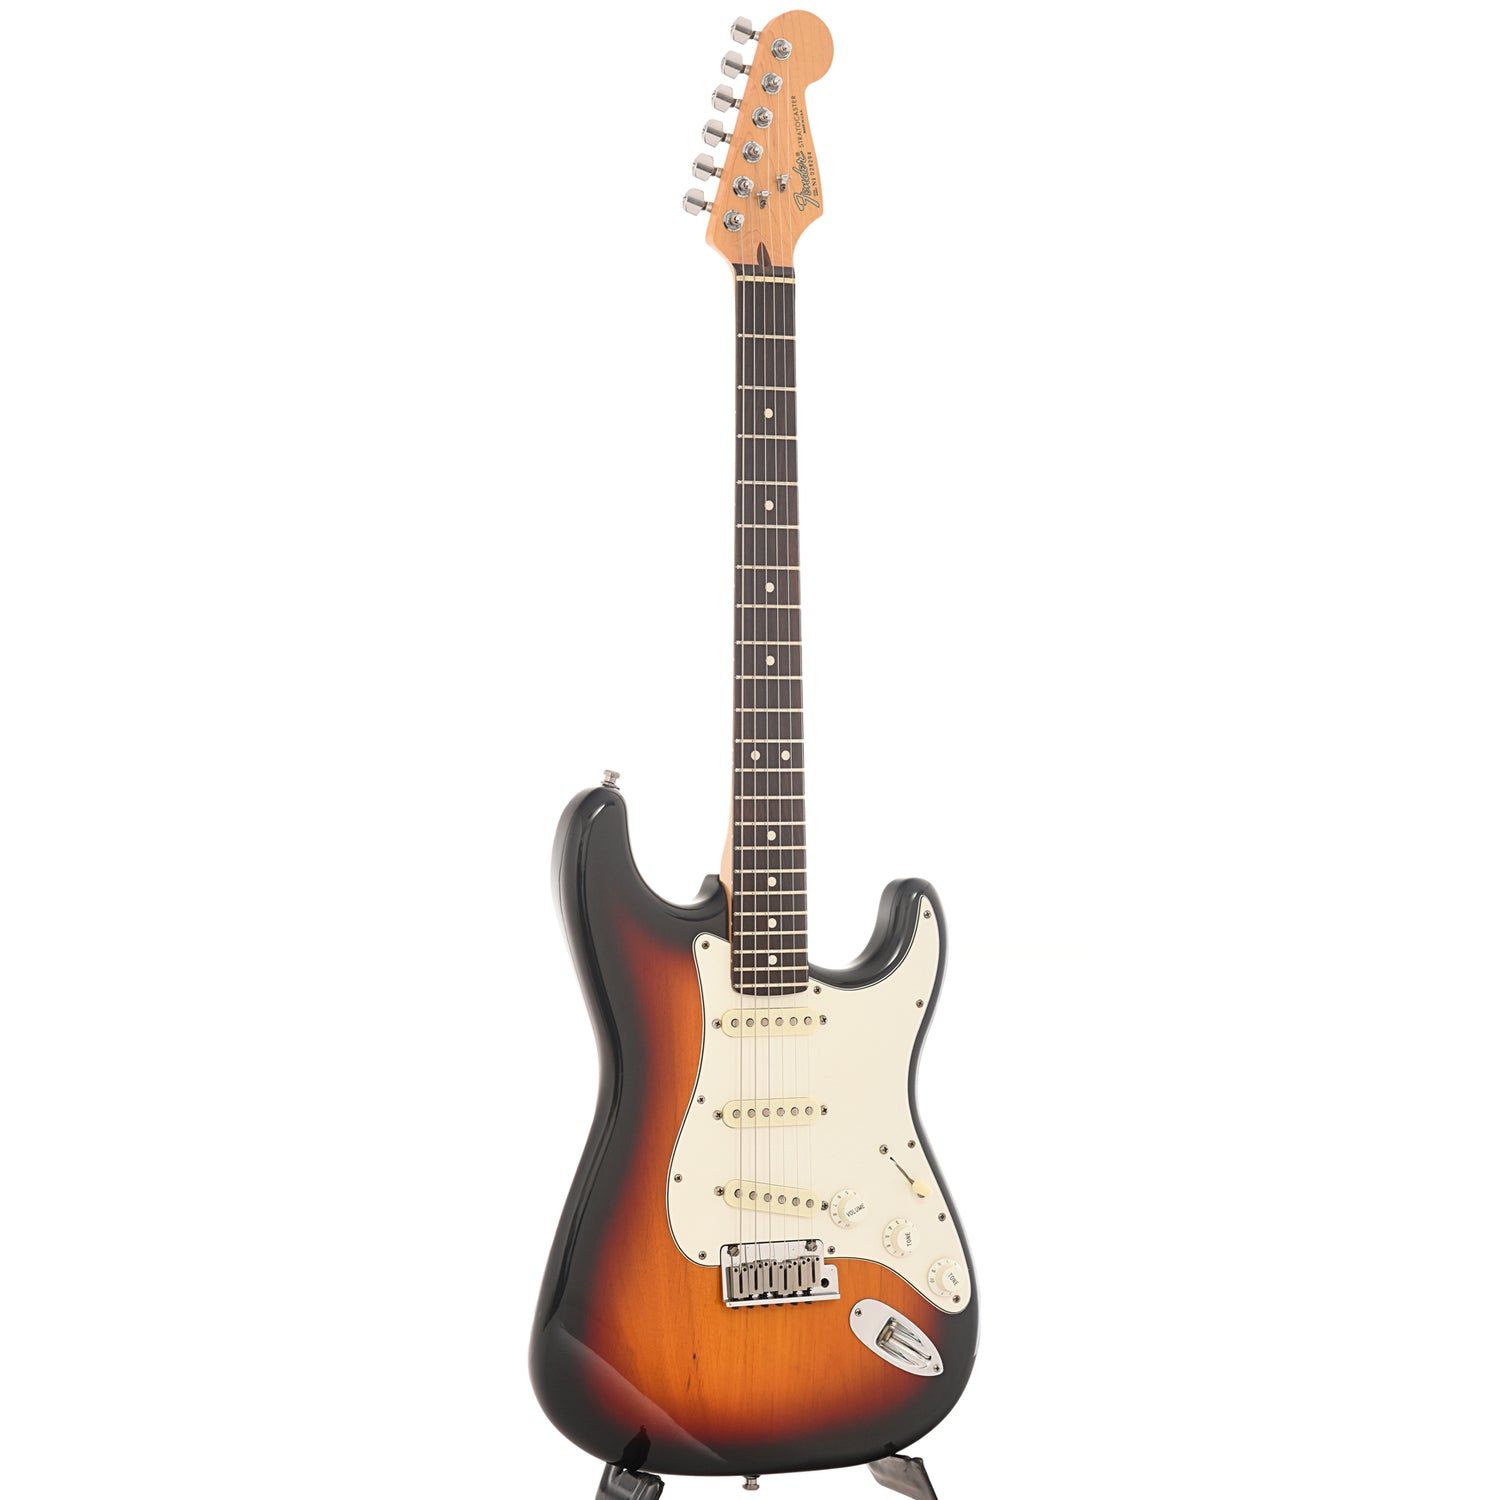 Full front and side of Fender American Standard Stratocaster